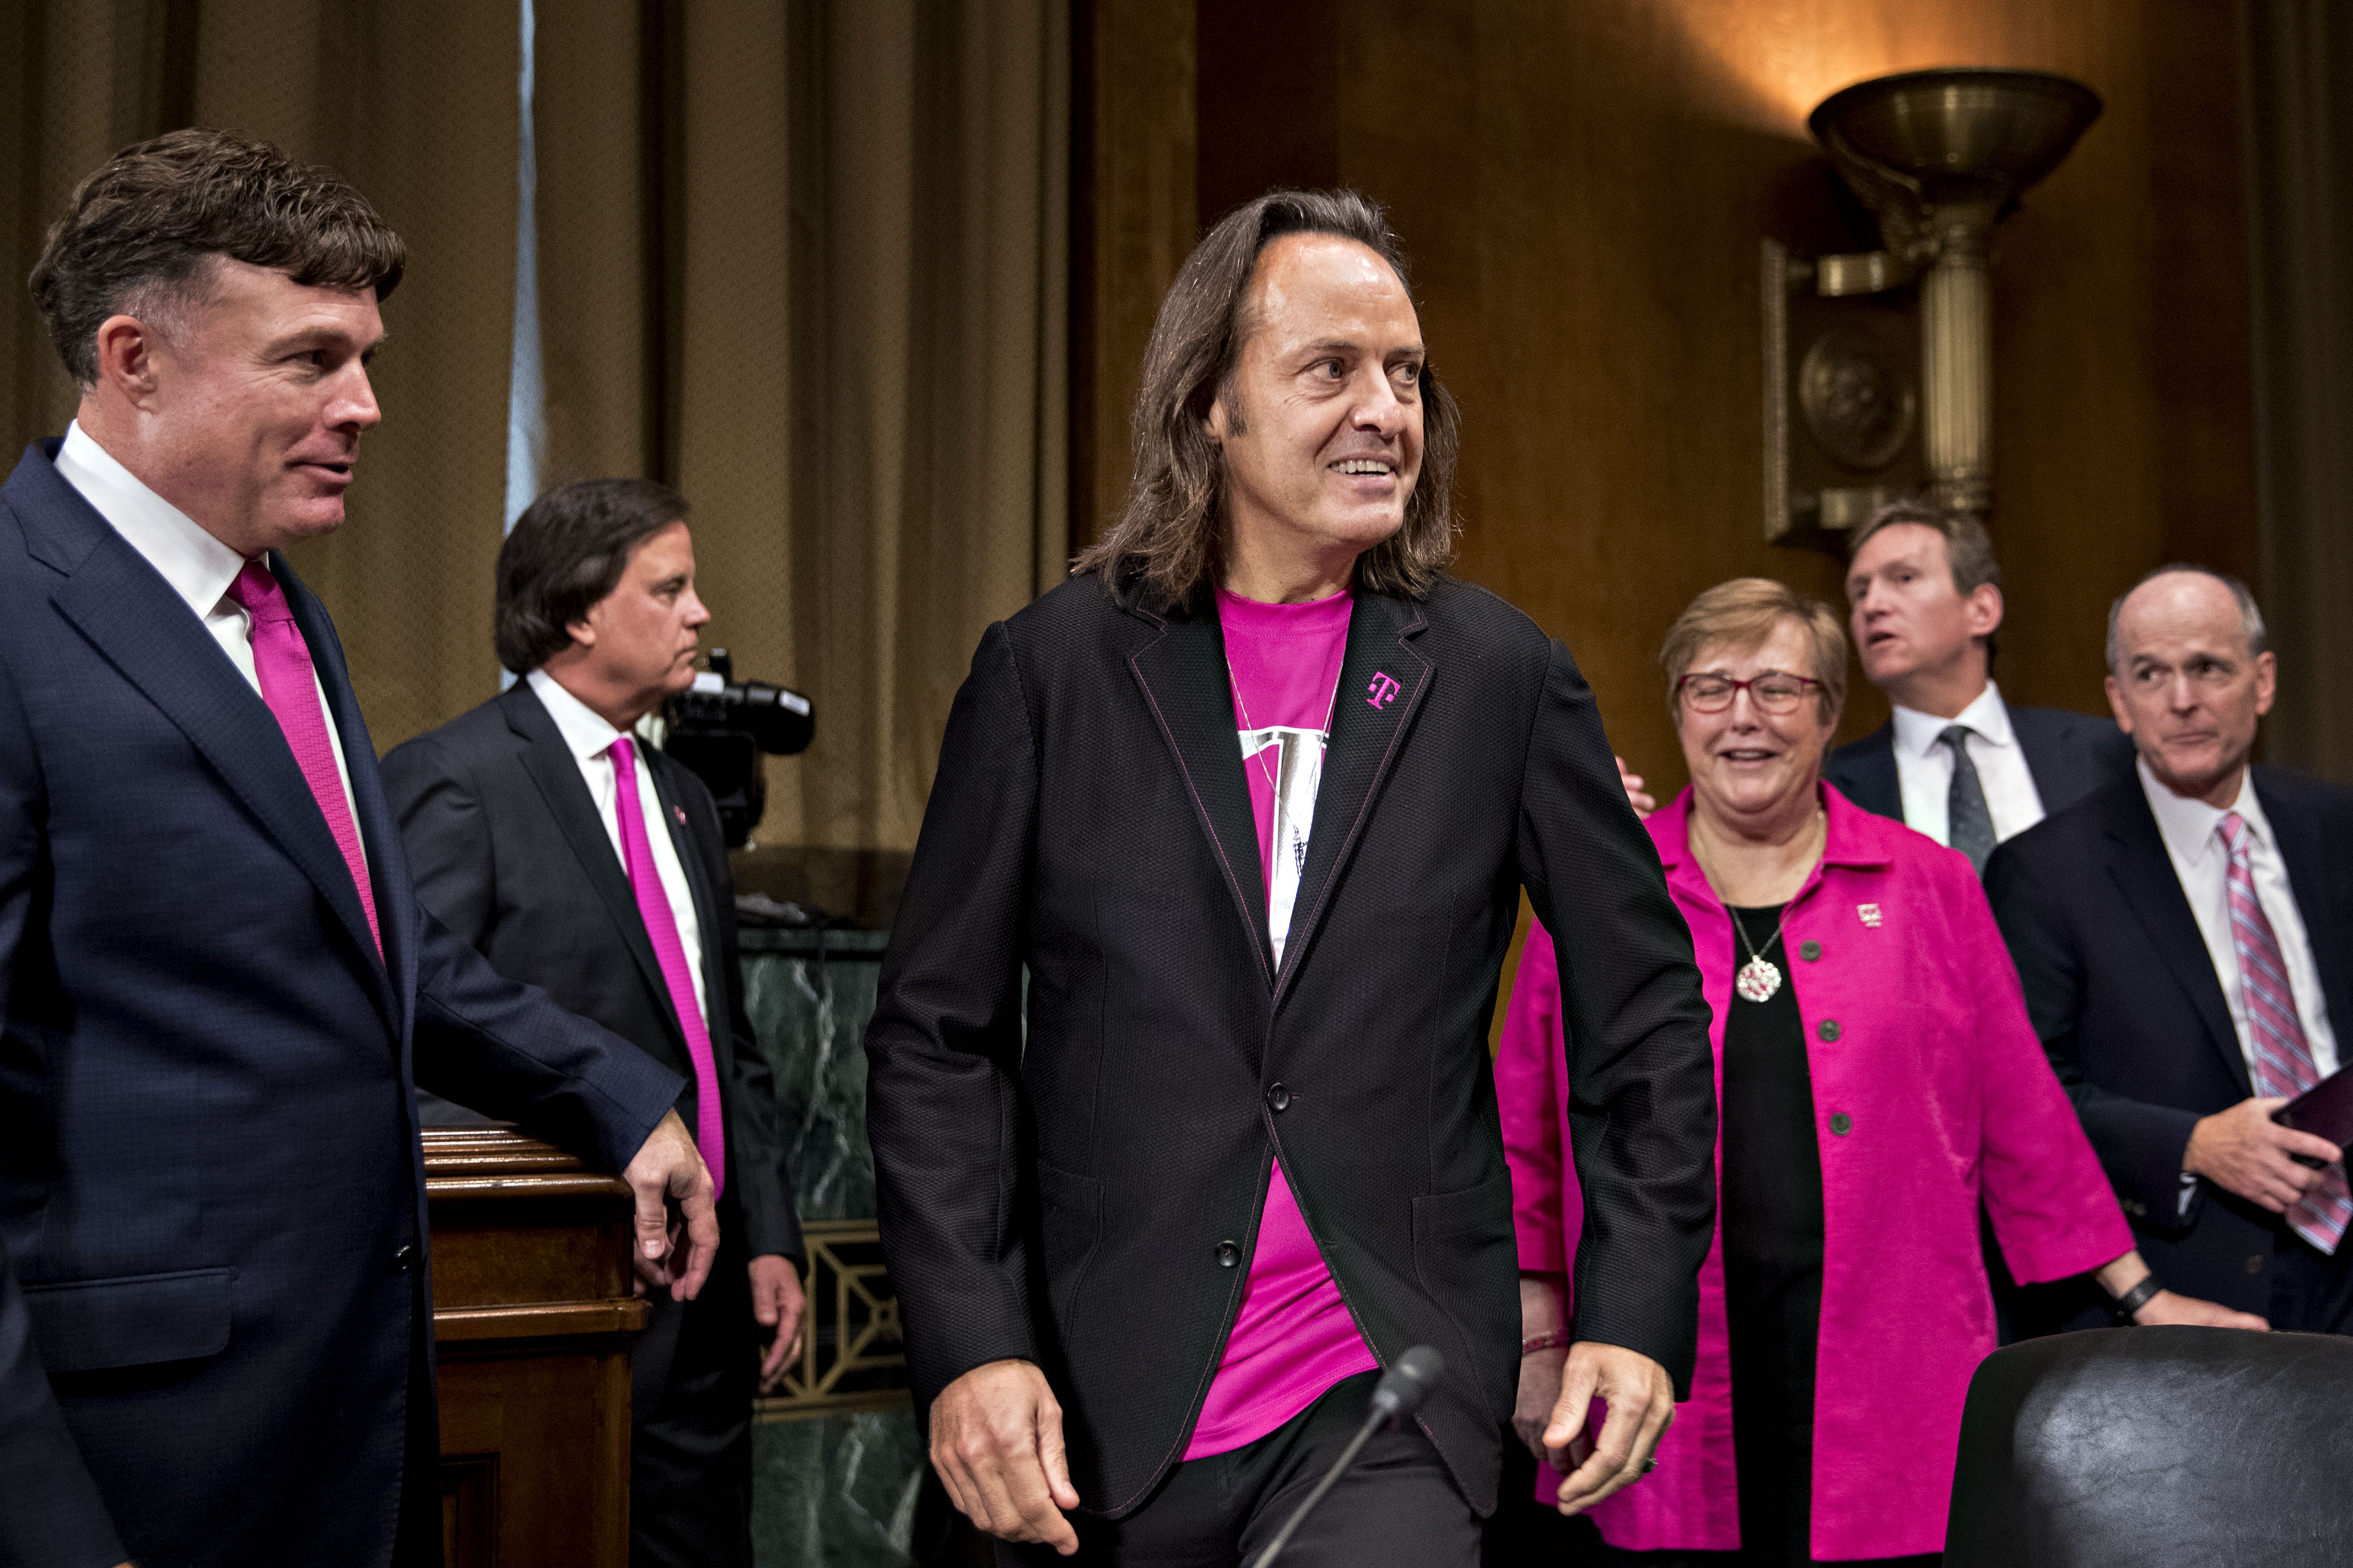 An image of John Legere and other T-Mobile employees at the Senate Judiciary Subcommittee meeting on June 28, 2018.